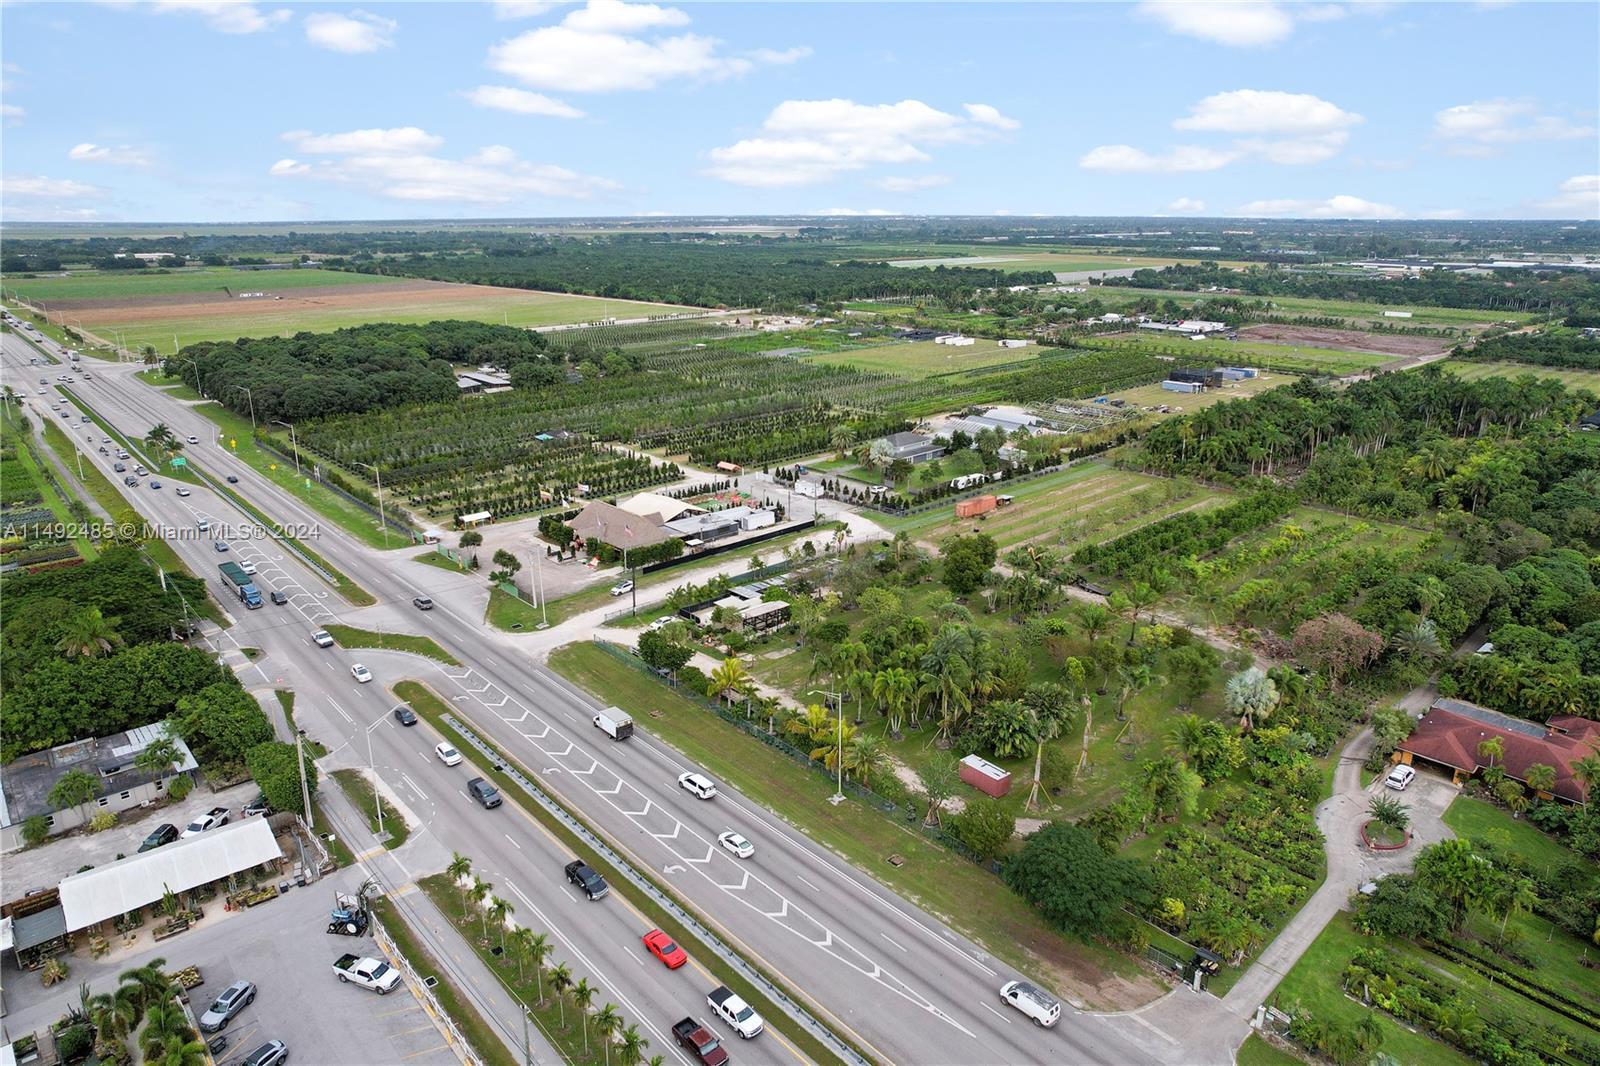 Photo of 188 St On SW 177 Ave in Unincorporated Dade County, FL